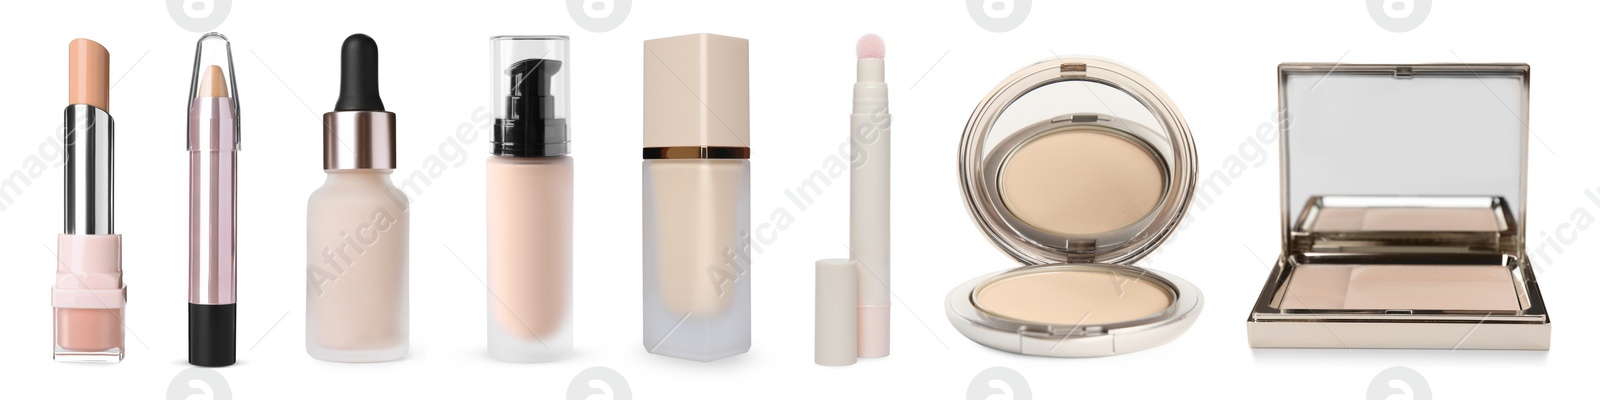 Image of Face powders, concealers, corrector and liquid foundations isolated on white. Collection of makeup products